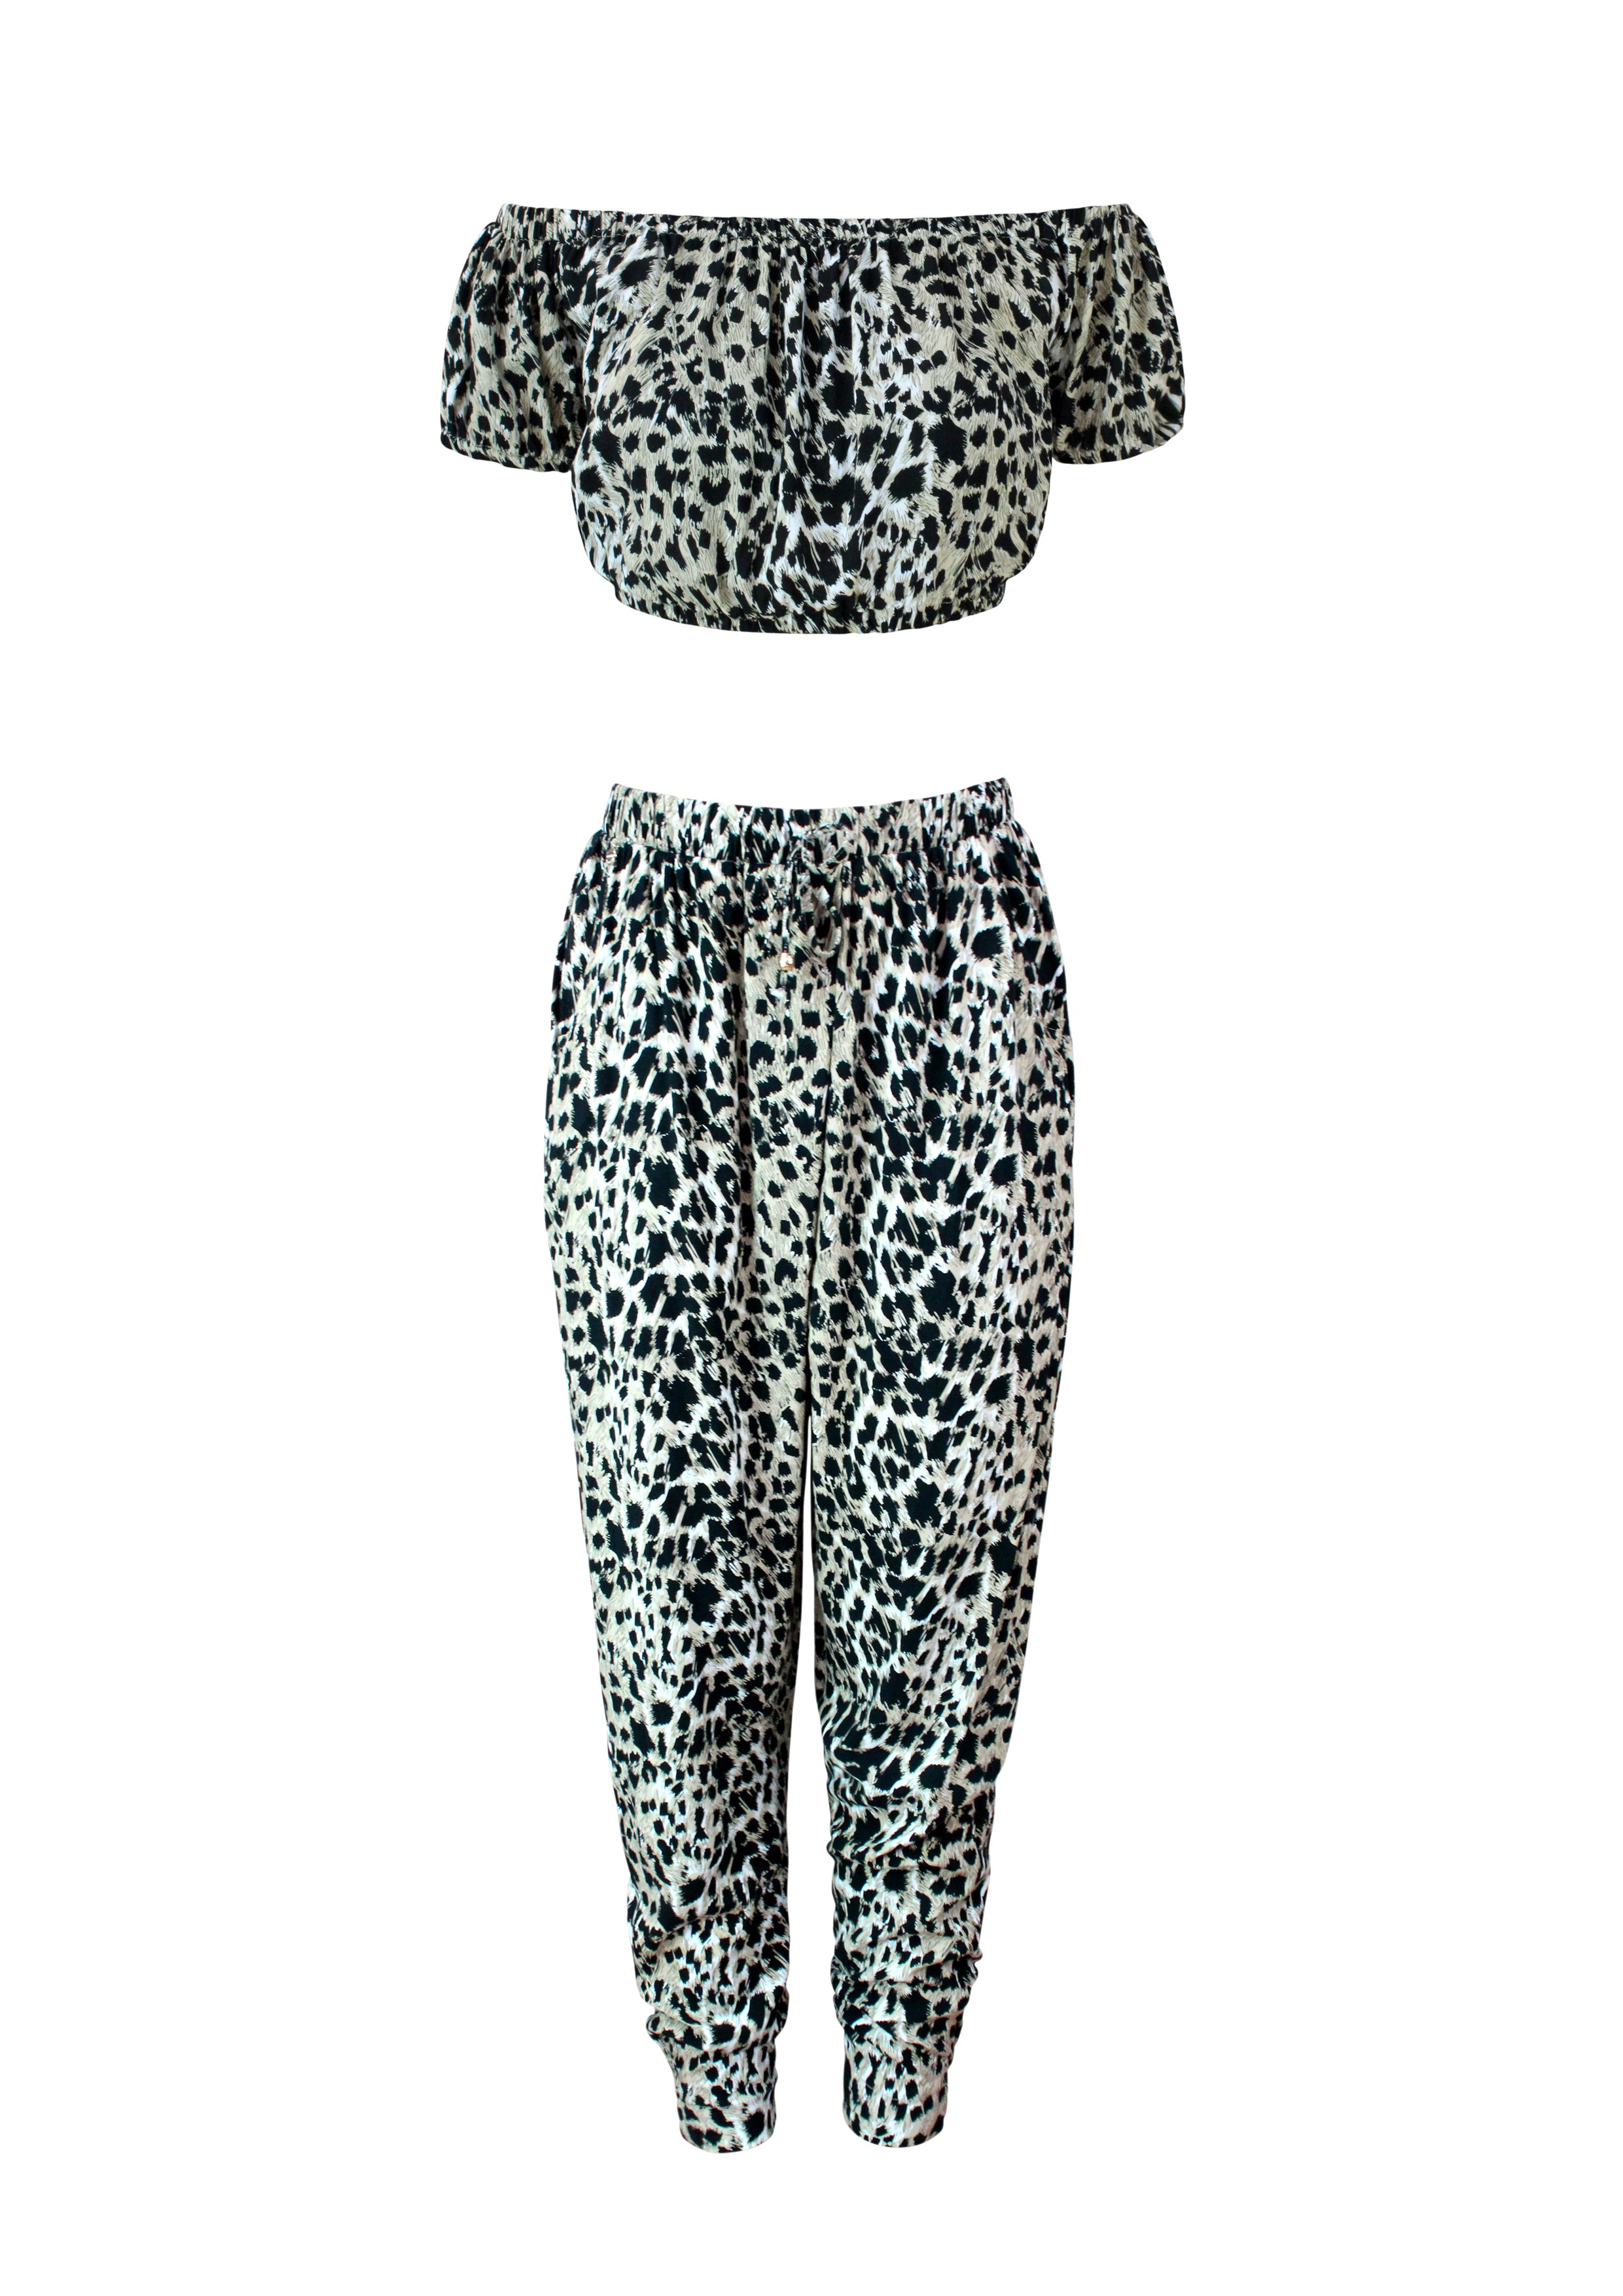 Leopard Black Katya Top and Beg Me Pant  - Resort Collection